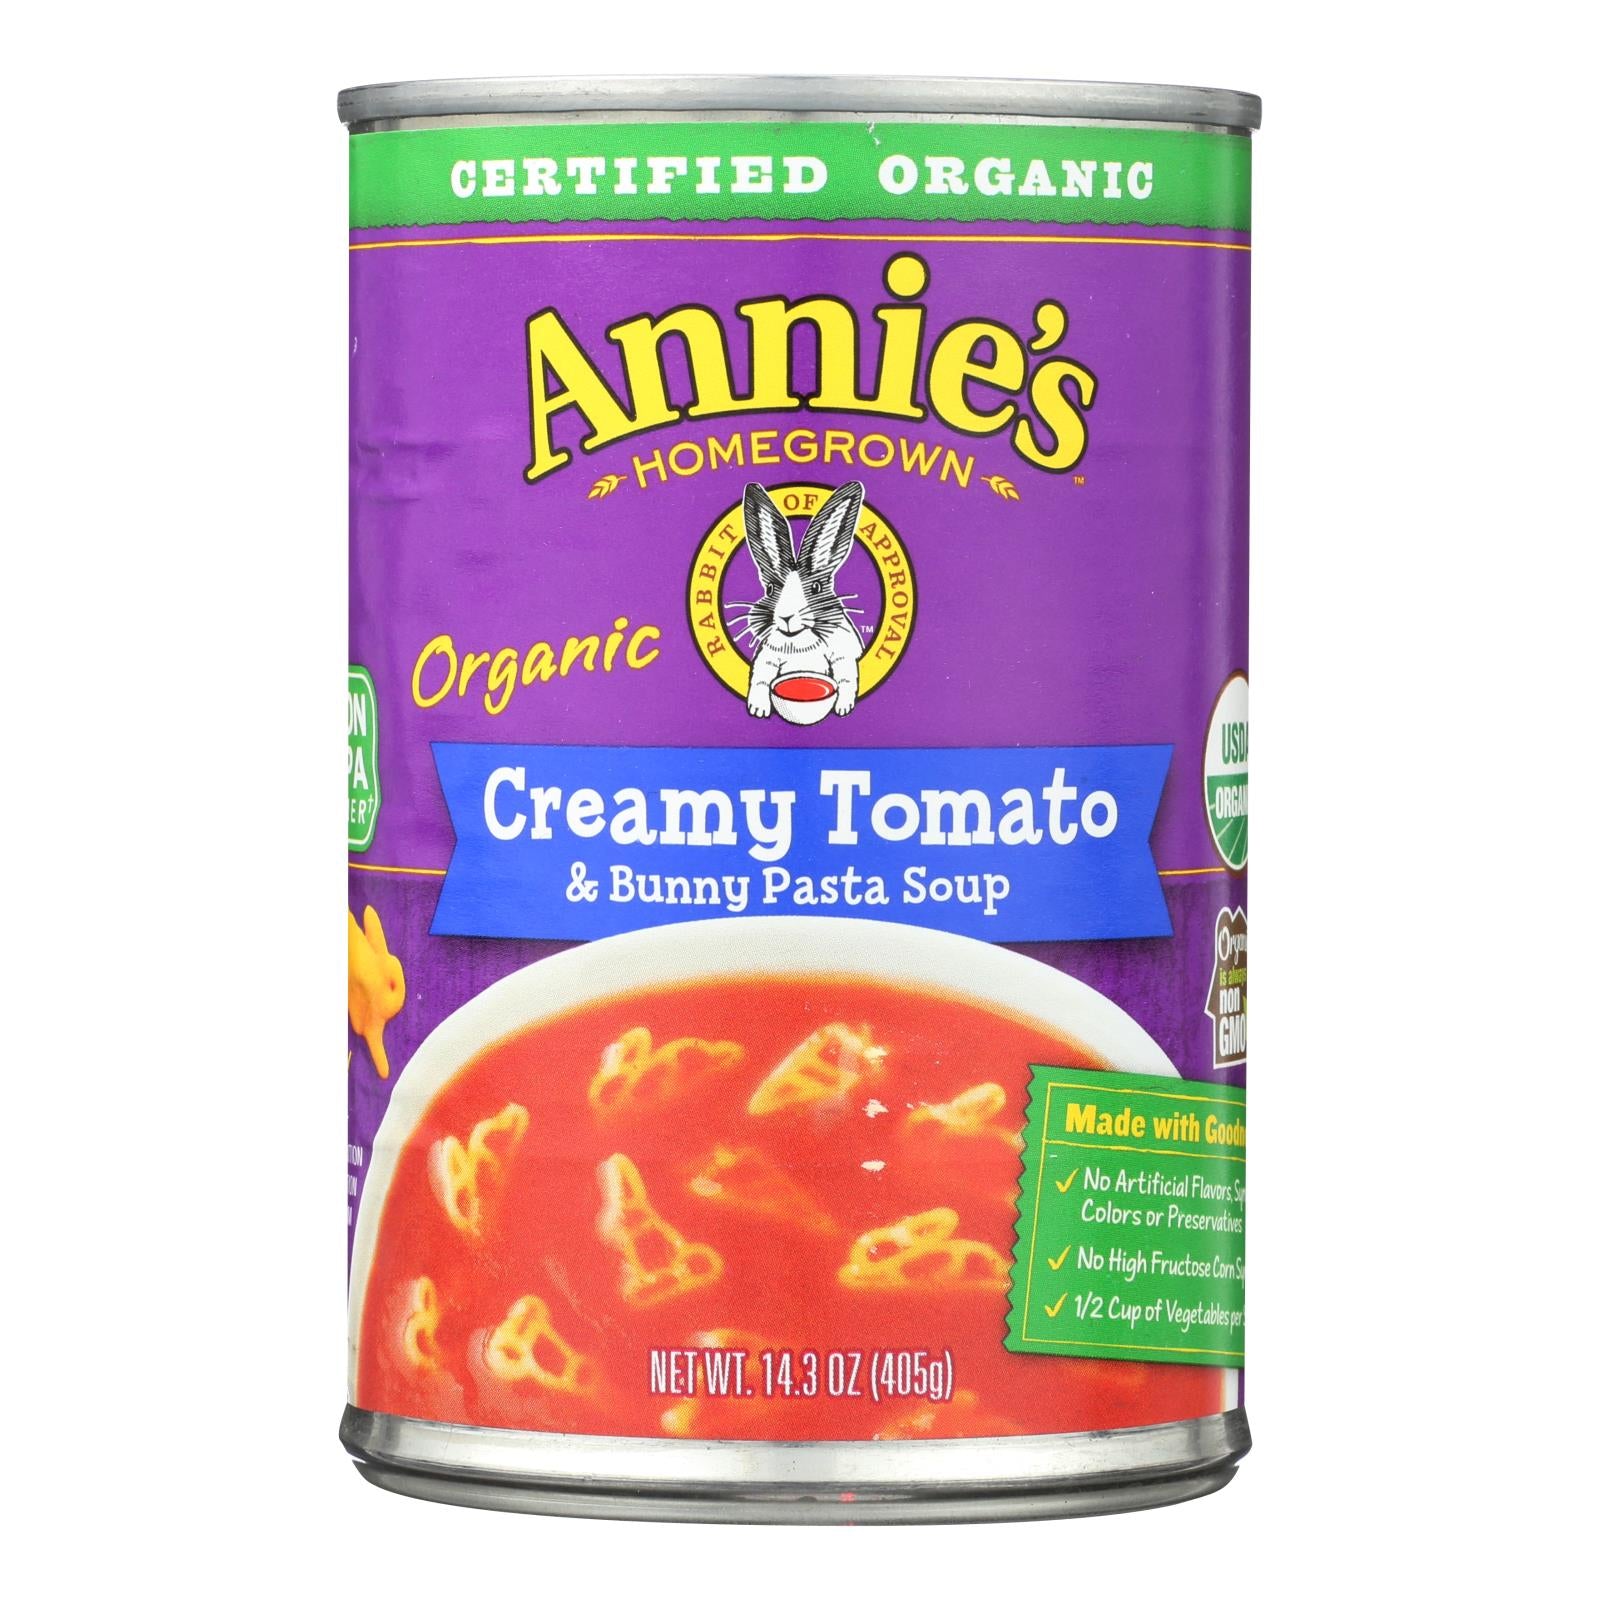 Annie'S Homegrown, Annie's Homegrown - Soup Creamy Tomato and Bunny Pasta Soup - Case of 8 - 14.3 oz. (Pack of 8)